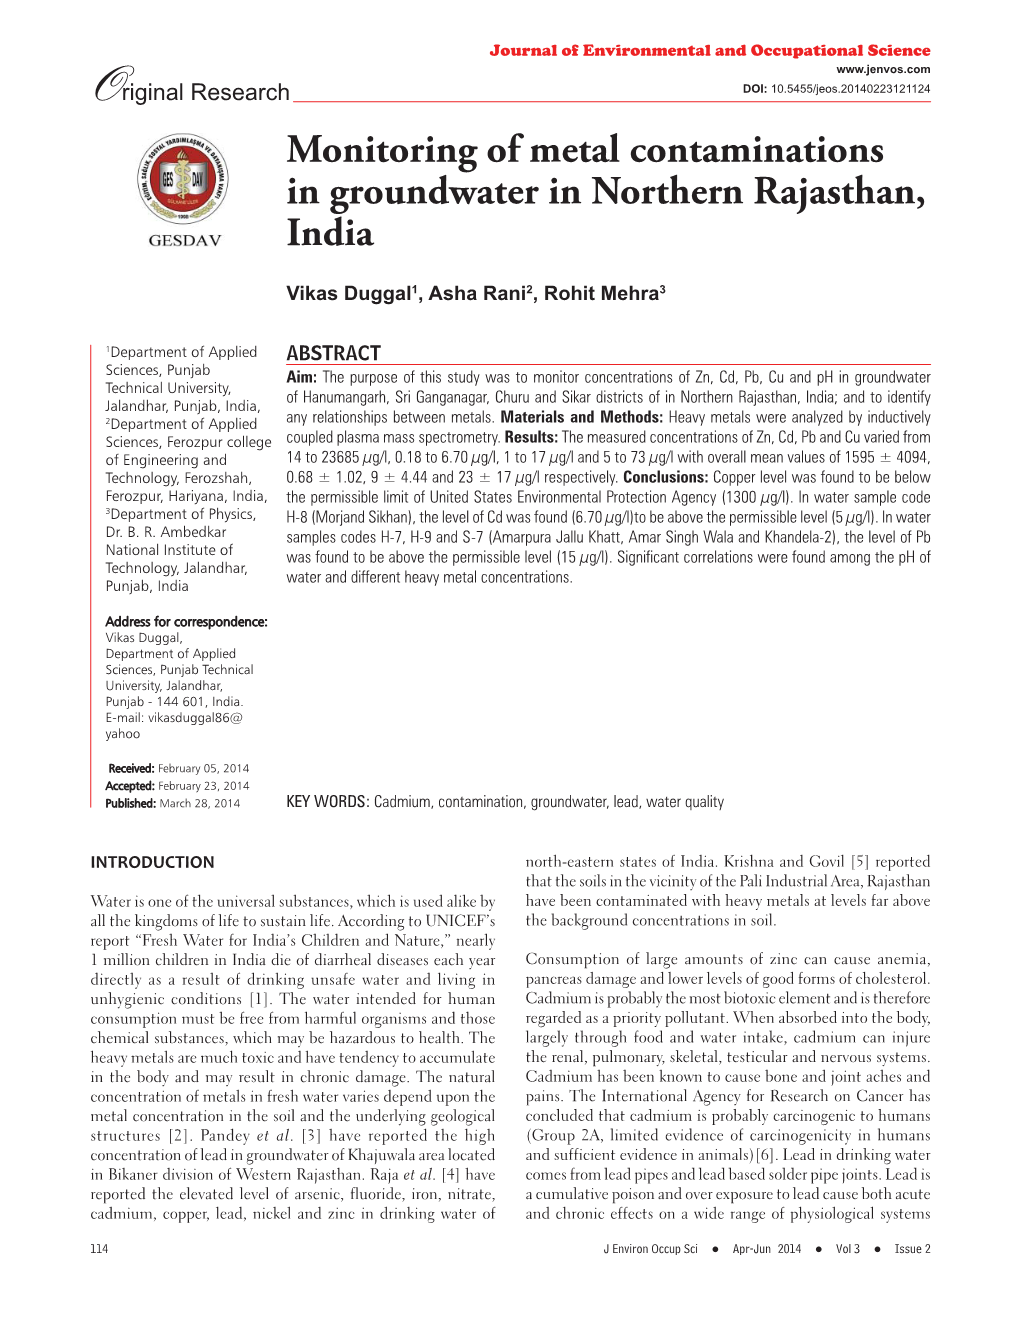 Monitoring of Metal Contaminations in Groundwater in Northern Rajasthan, India